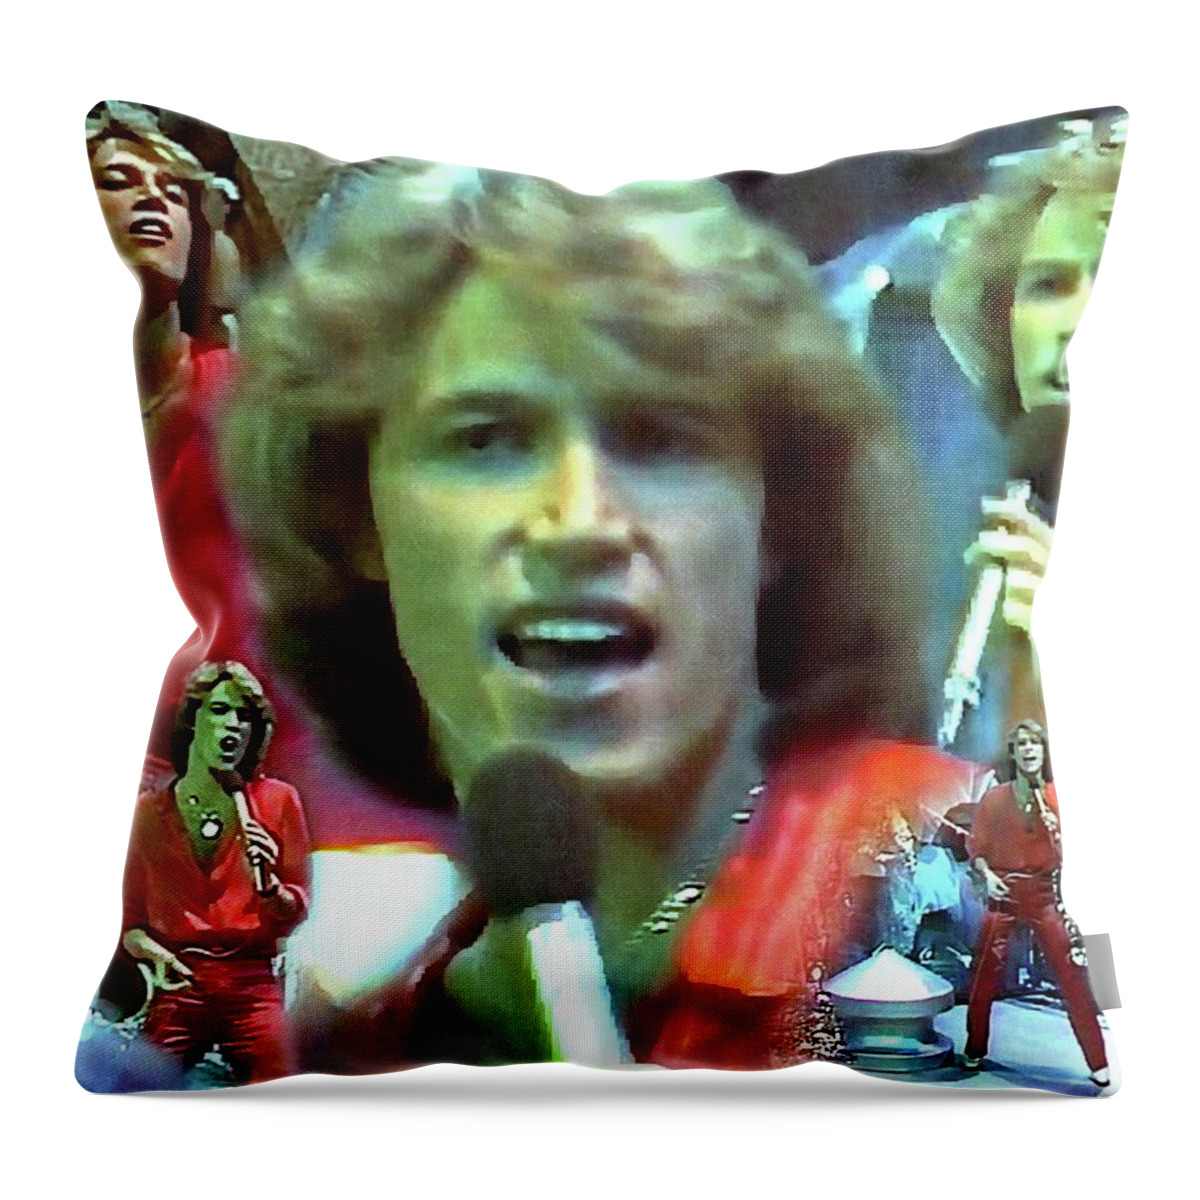 Andy Gibb Throw Pillow featuring the painting Andy Gibb by Mark Baranowski